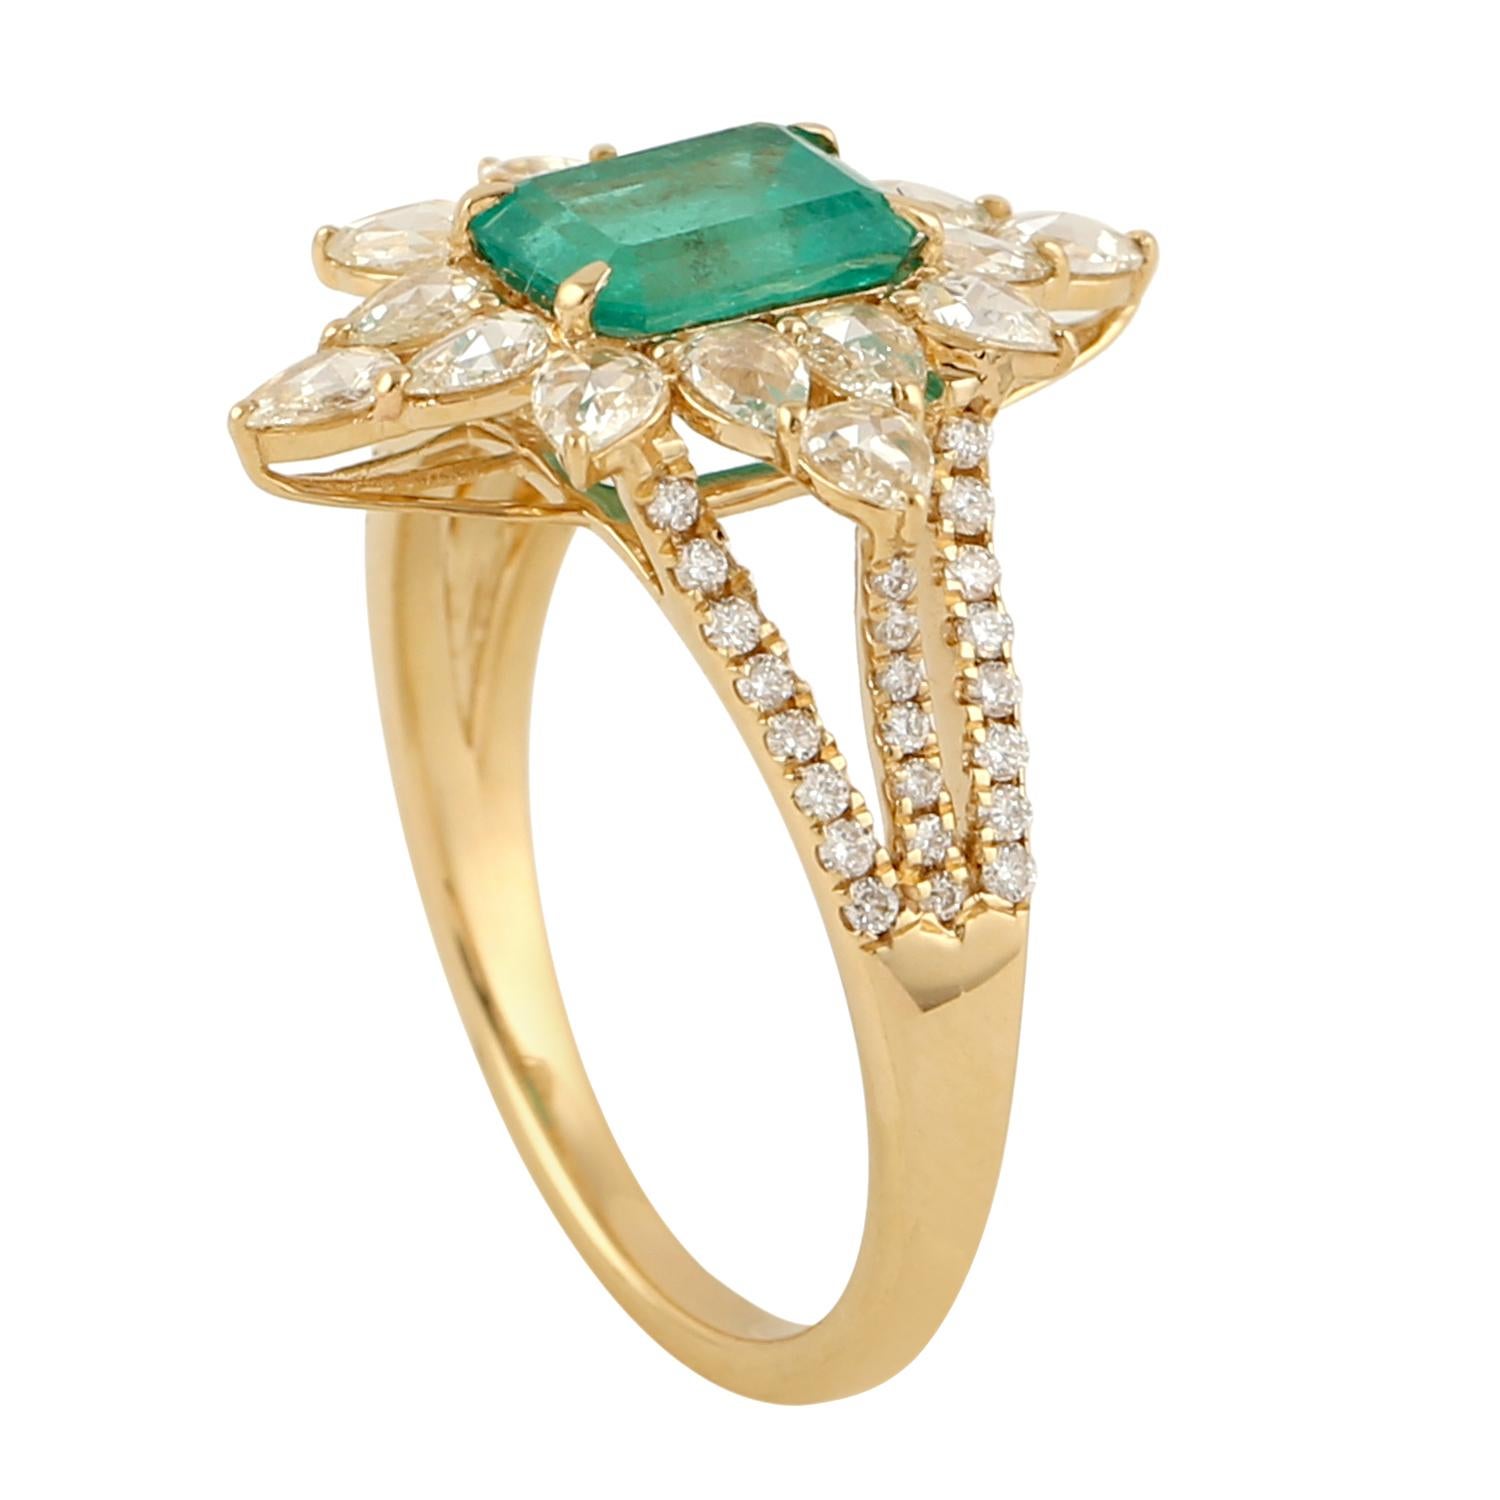 Octogen Shaped Emerald Starburst Ring With Rose Cut Diamonds In 18k Yellow Gold In New Condition For Sale In New York, NY